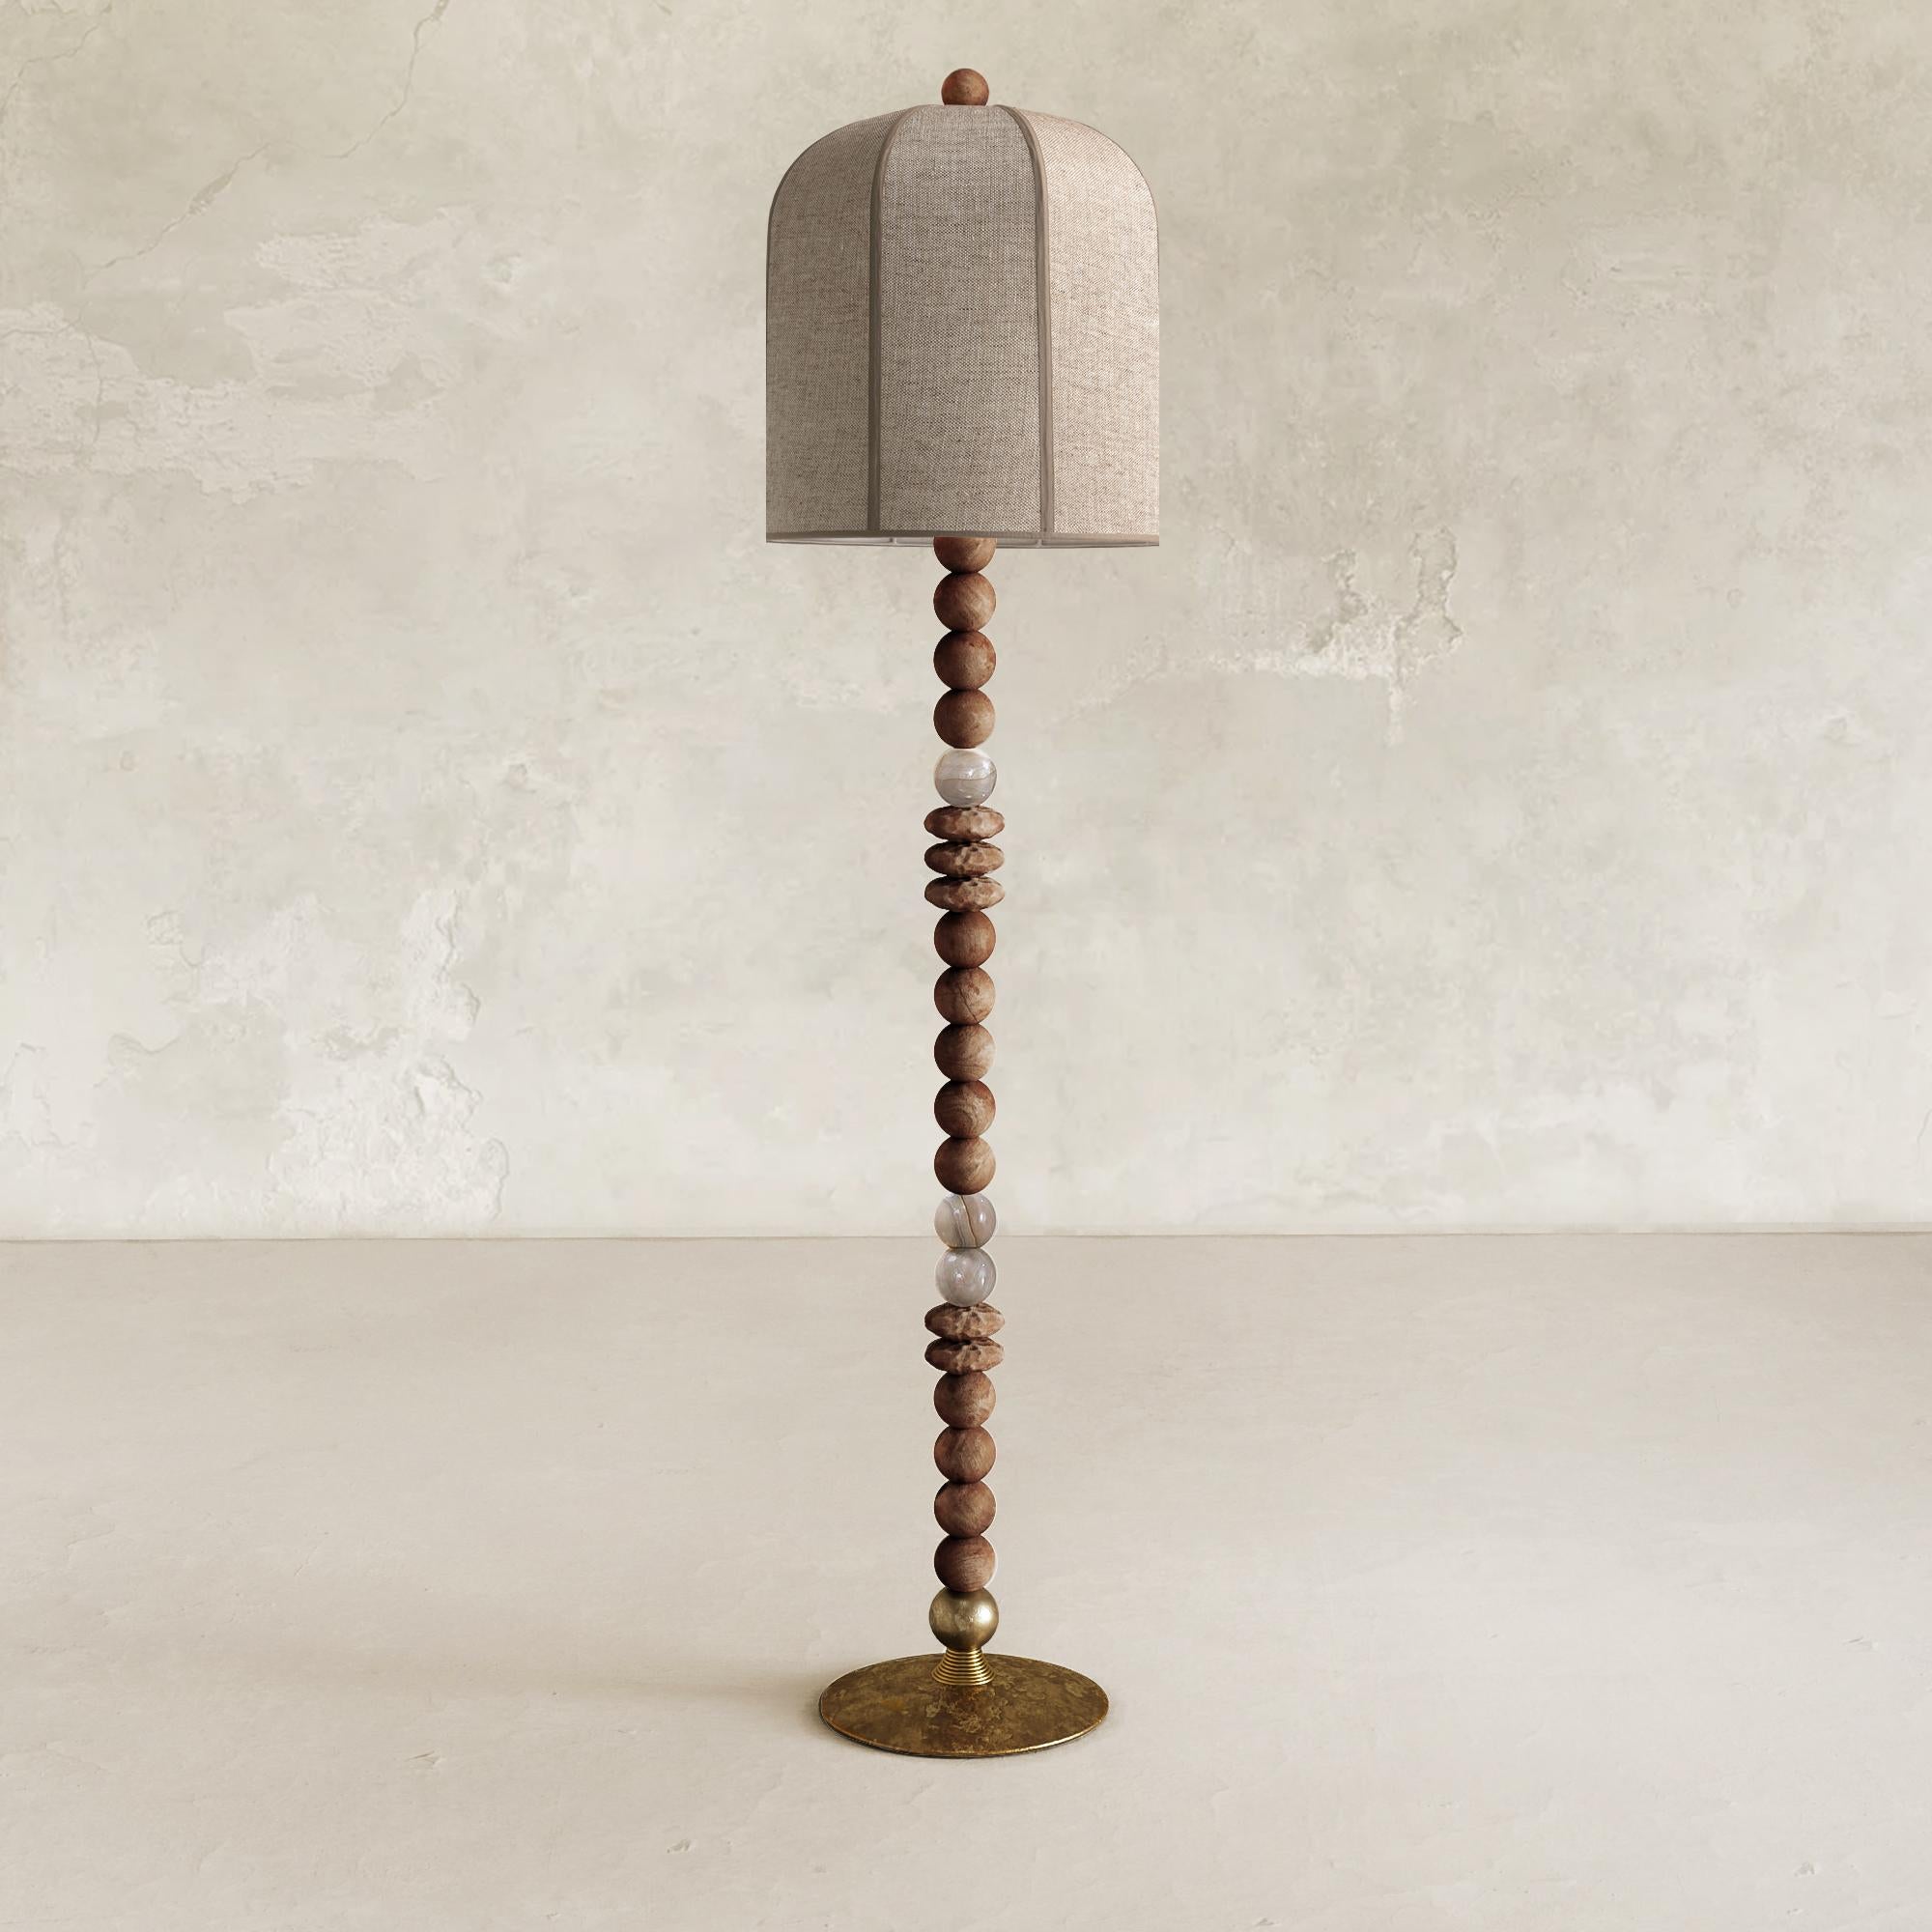 The Iris Floor Lamp is a handcrafted lighting fixture, which incorporates solid wood, alabaster, and liquid bronze to create a unique appearance. Traditional techniques such as casting and hand sculpting are used in its creation, and each piece is